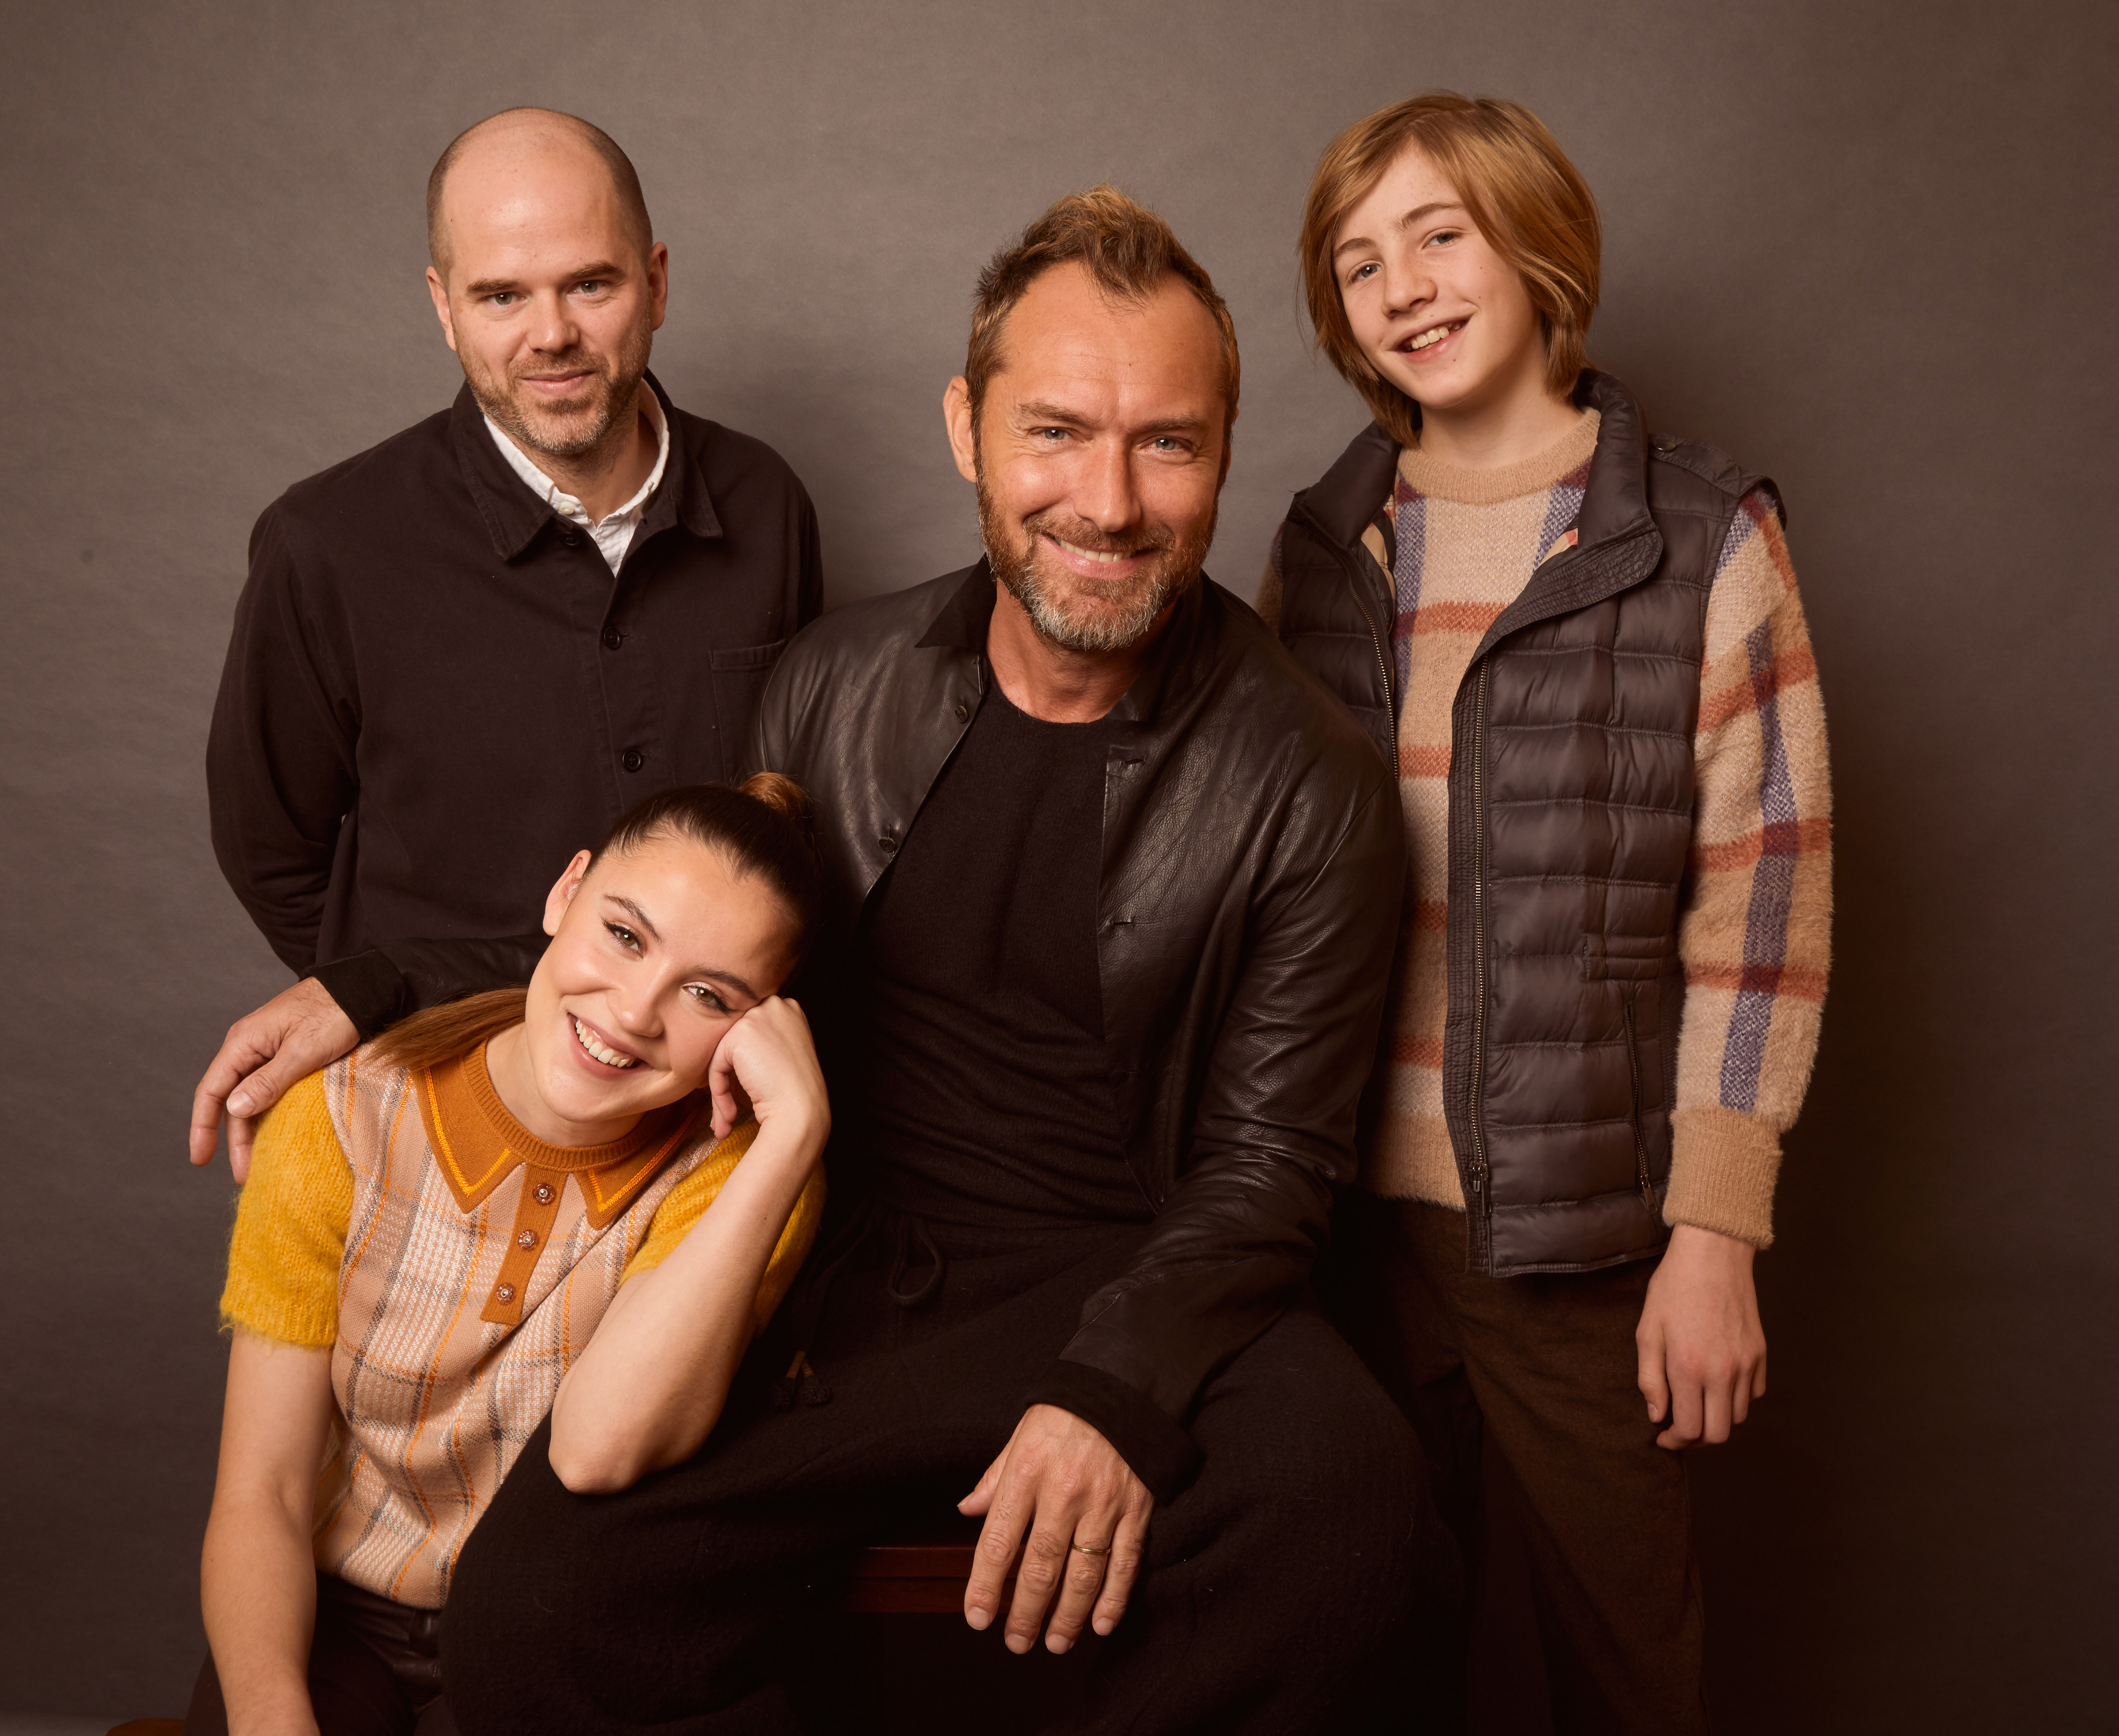 Jude Law, Carrie Coon on the Moody Marital Drama The Nest